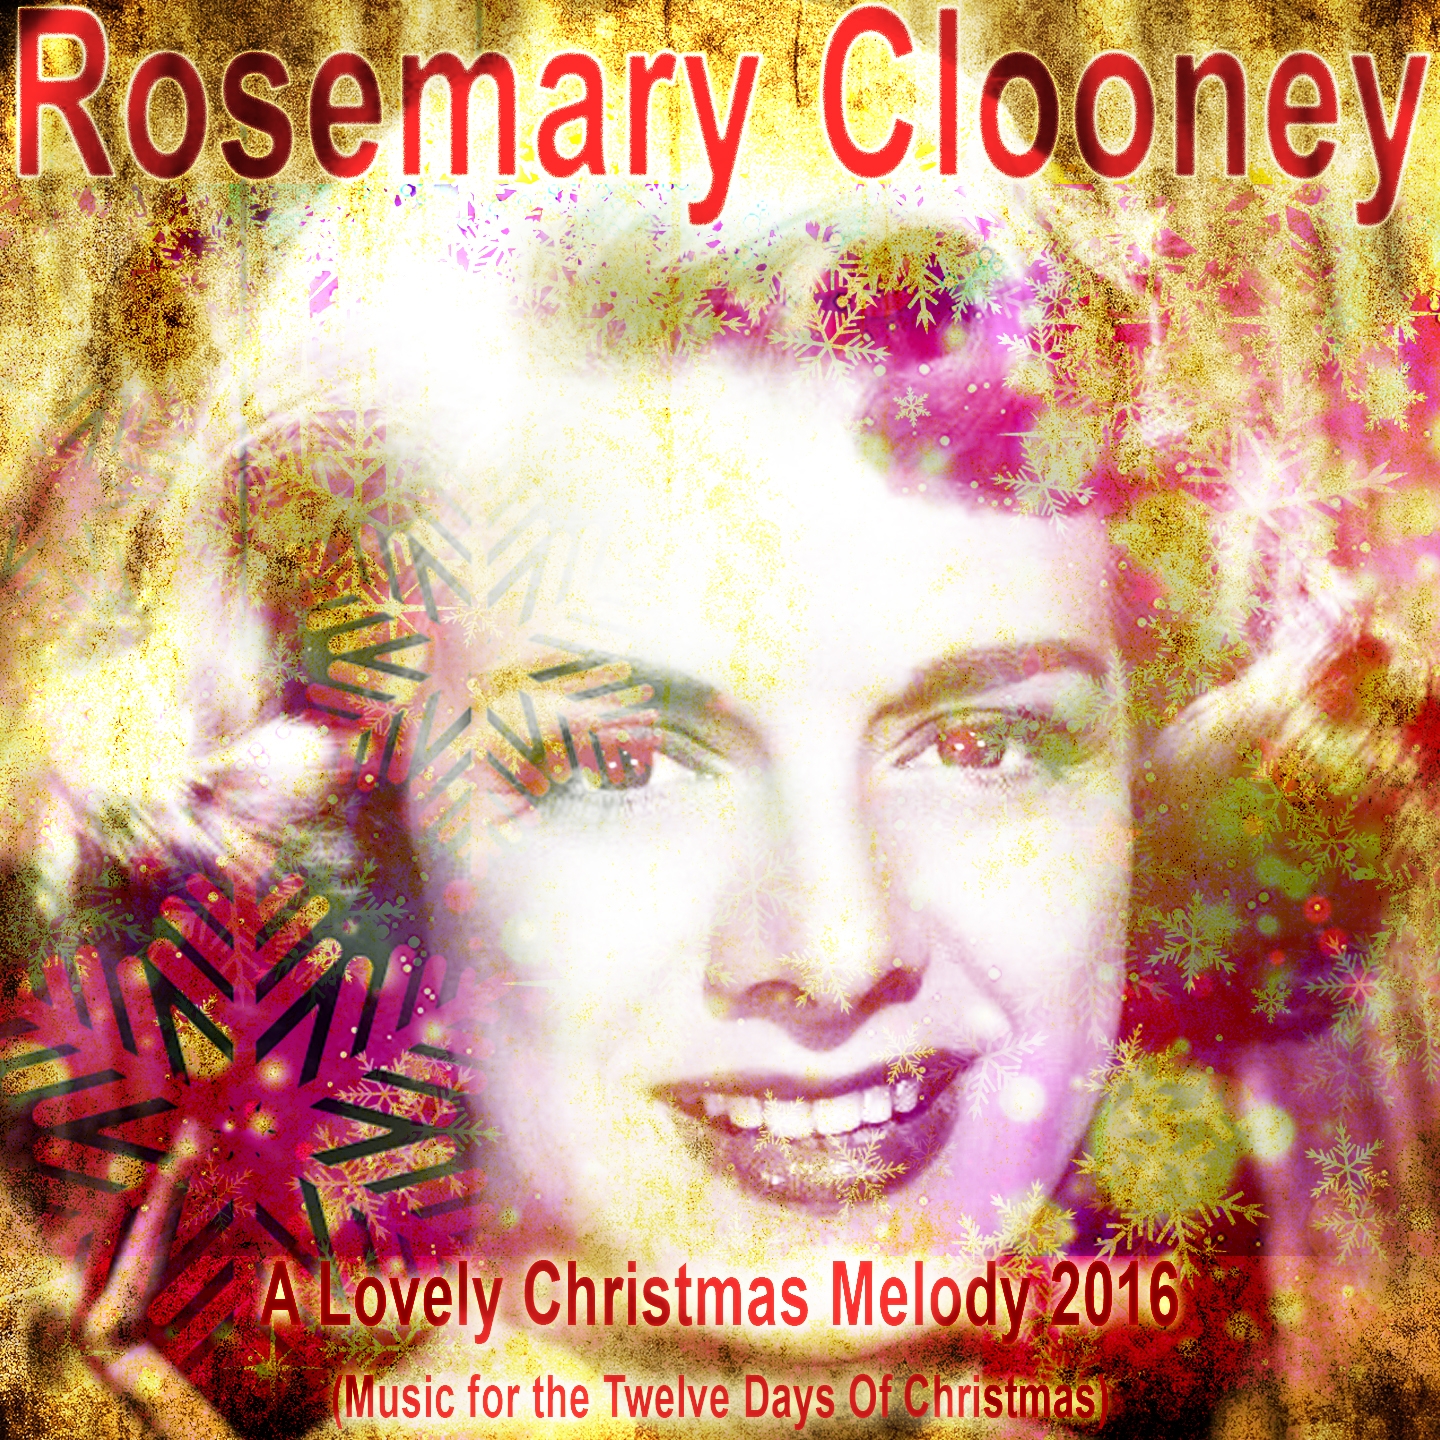 A Lovely Christmas Melody 2016 (Music for the Twelve Days of Christmas)